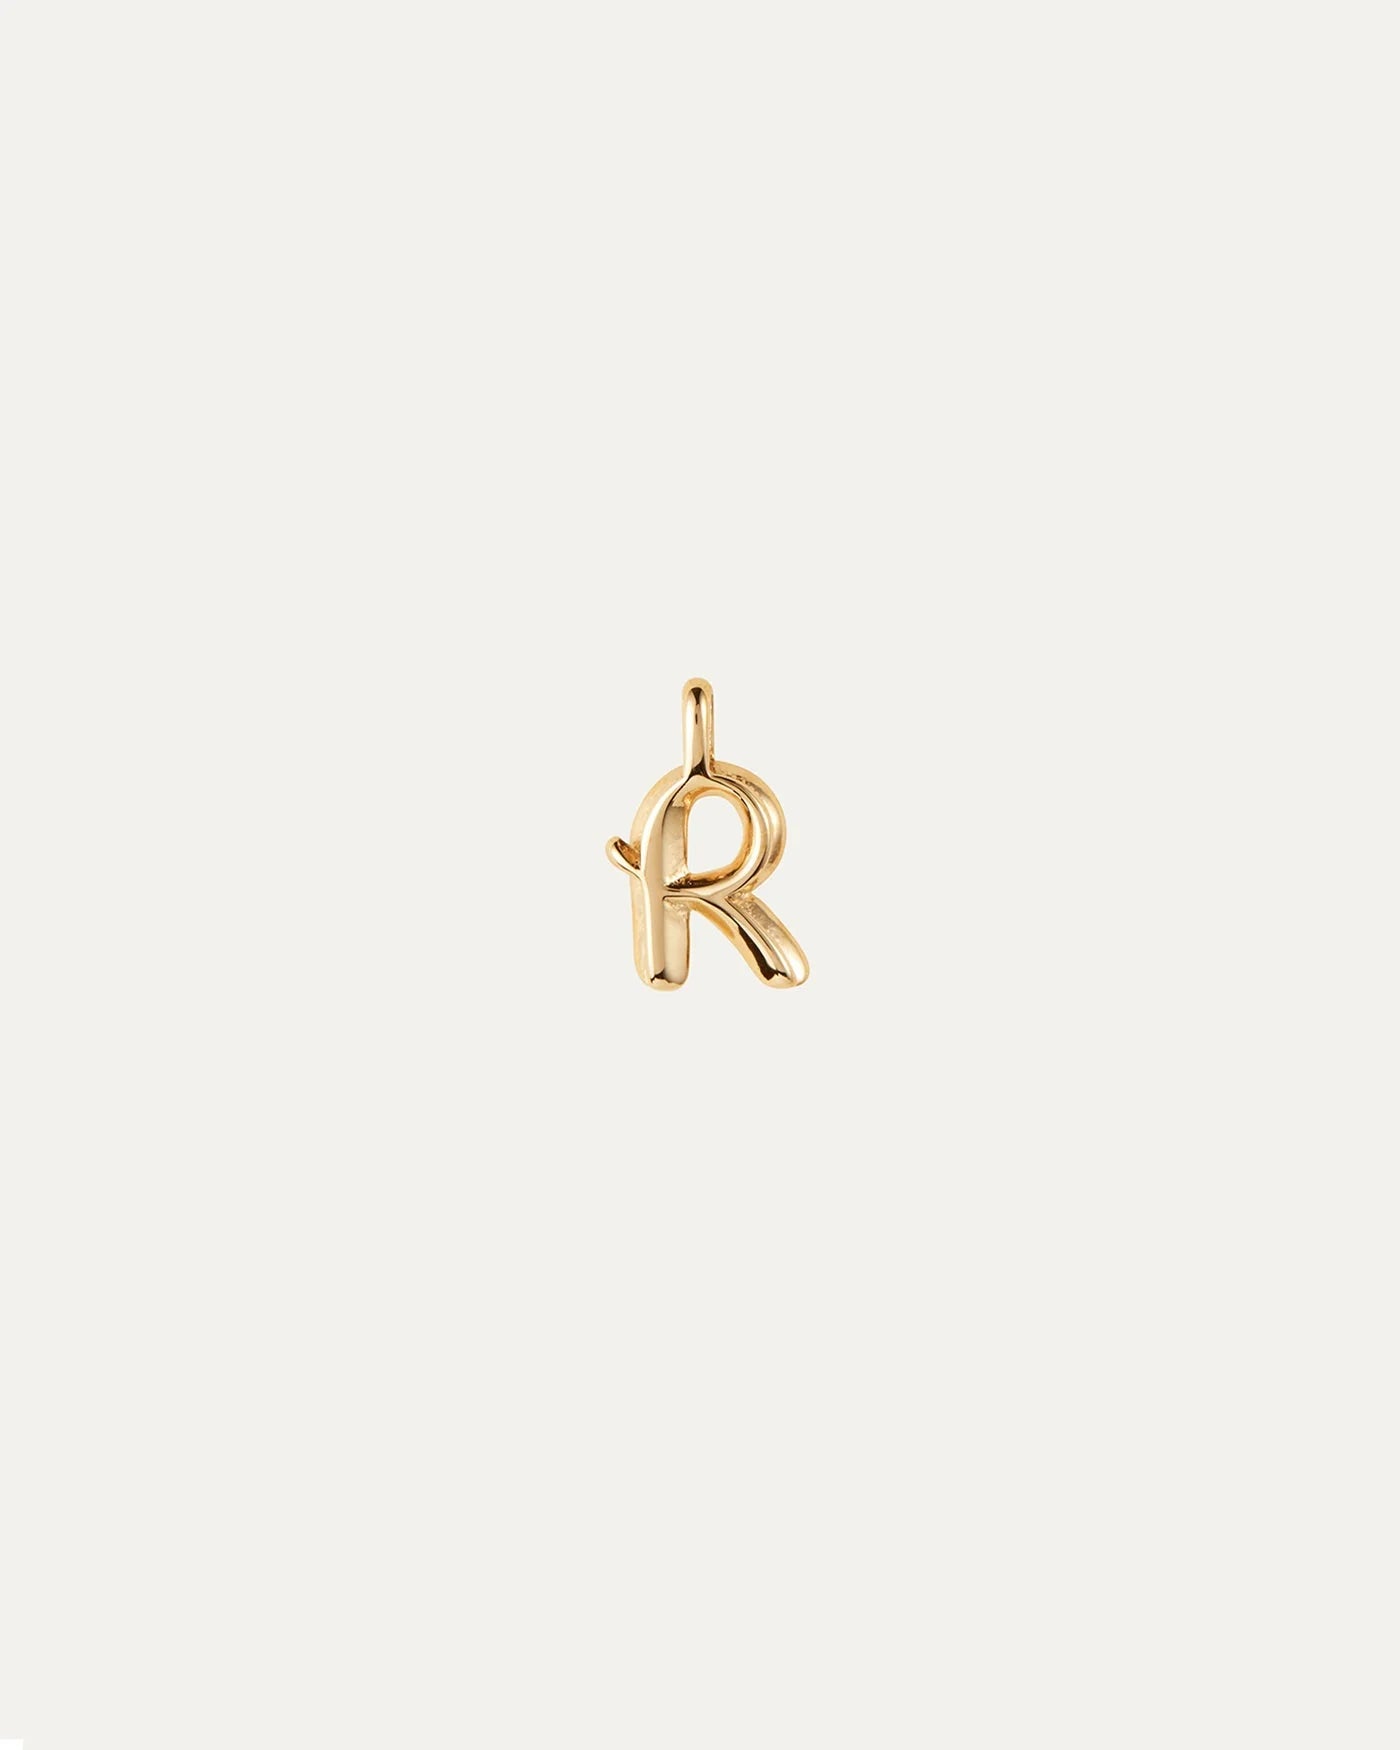 Monogram Necklace in Gold